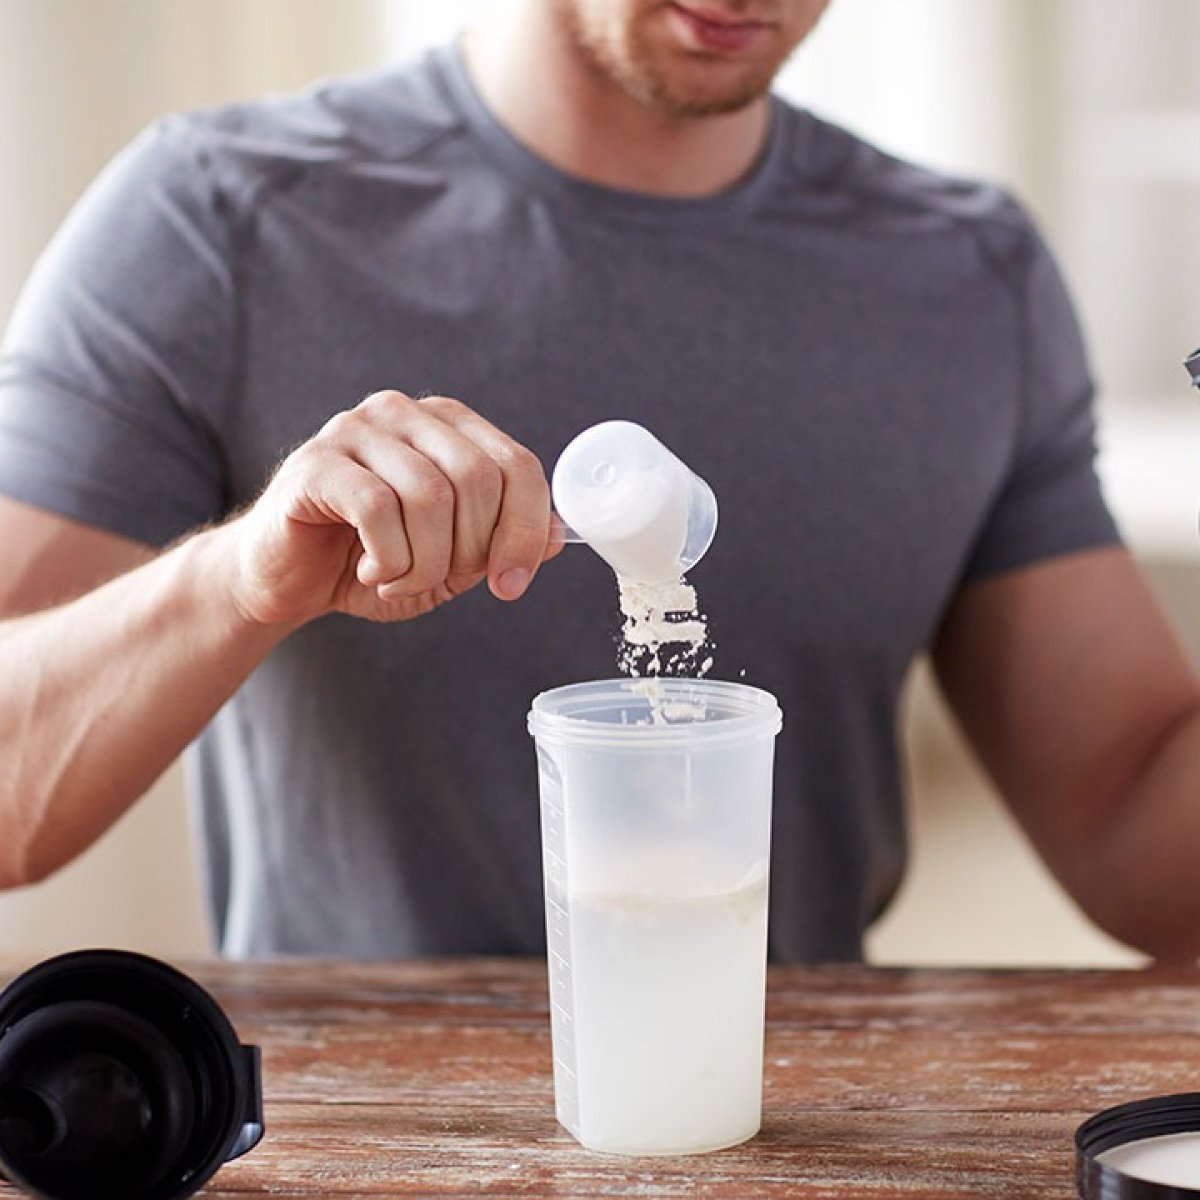 Is Your Whey Protein Powder Harming You?